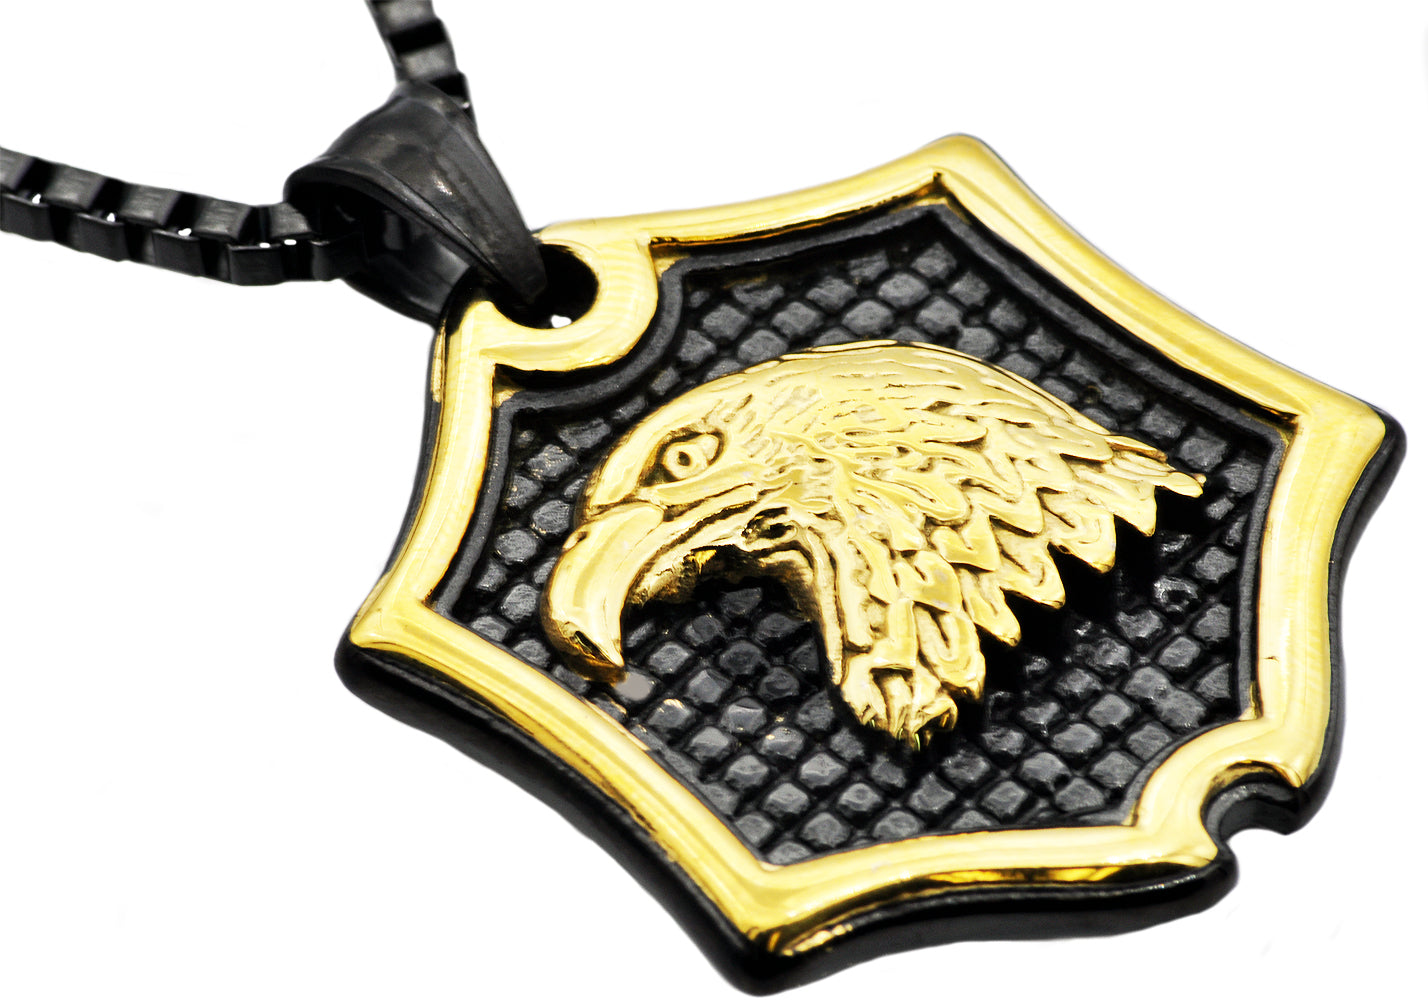 Black and Gold Eagle